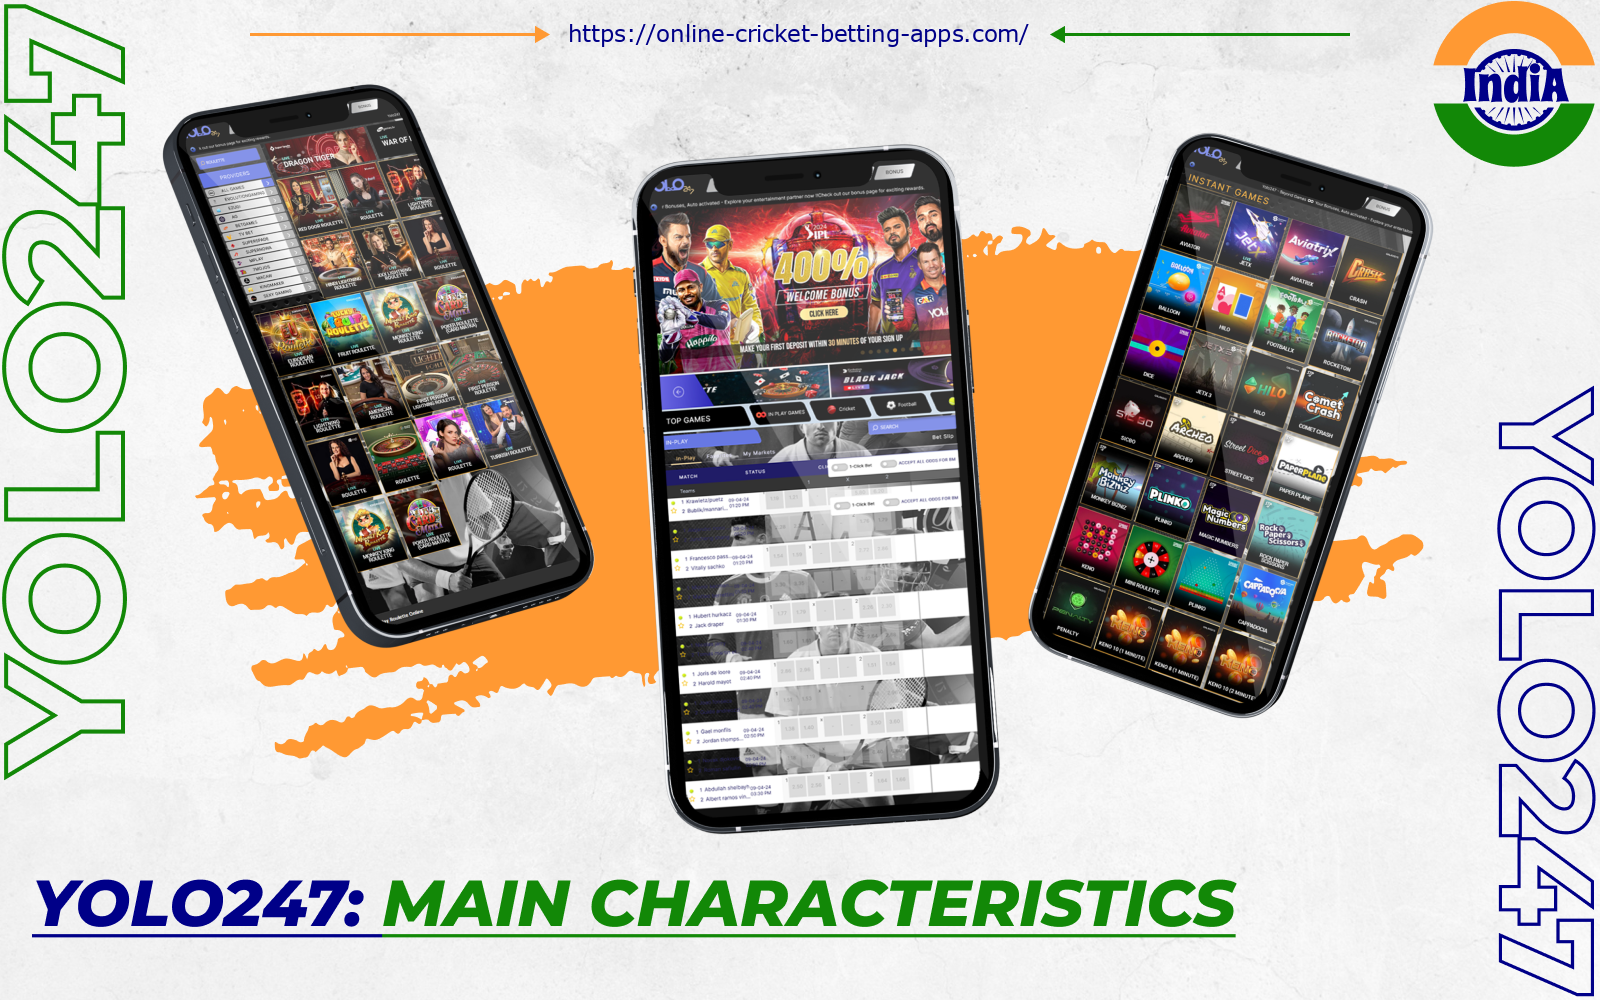 By downloading the Yolo247 mobile app, players from India will have in their pocket a complete set of tools required for betting on all popular sports disciplines as well as casino games